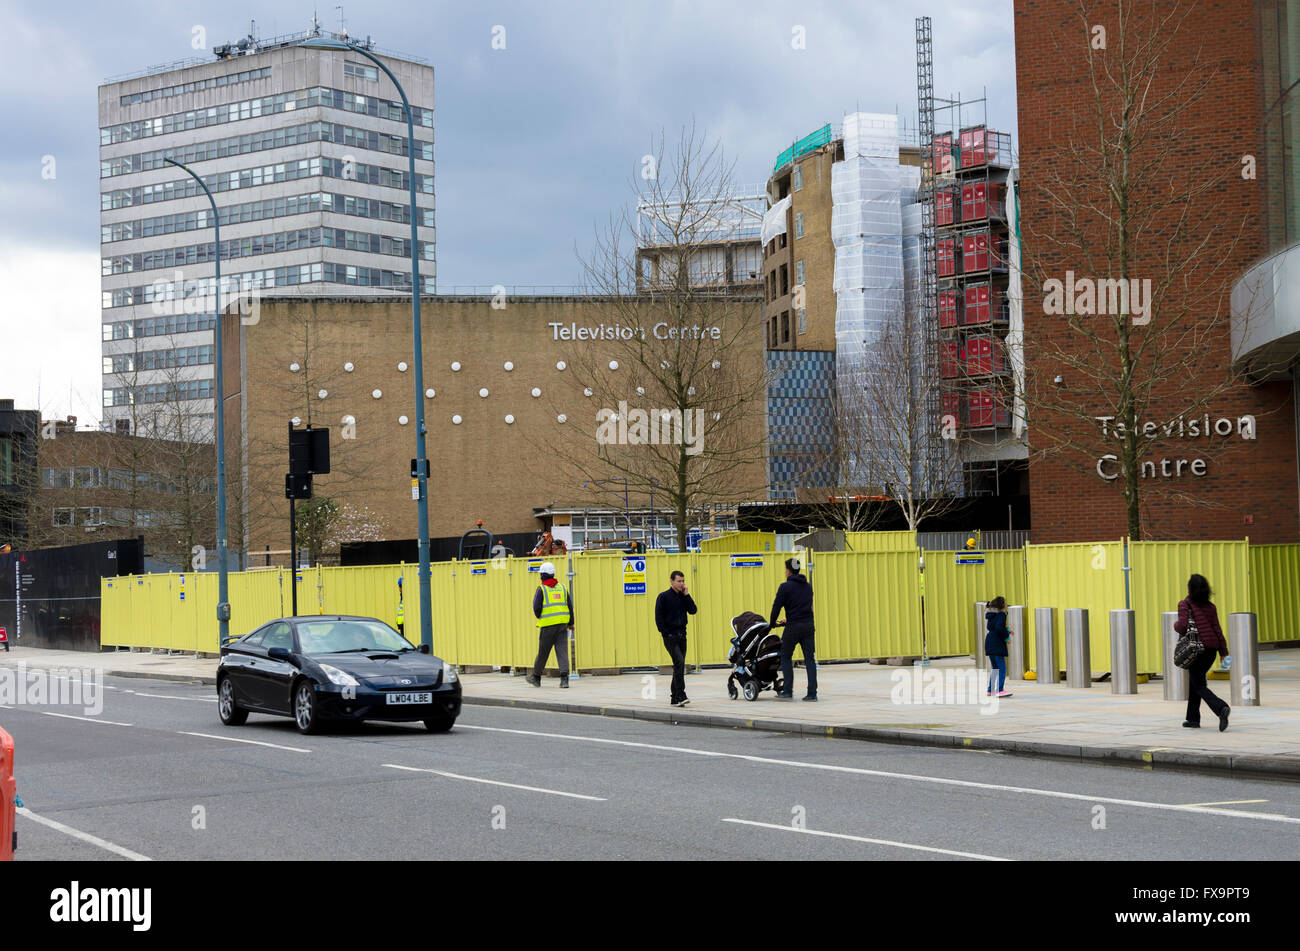 BBC Television Center on Wood Lane in London under redevelopment. Stock Photo